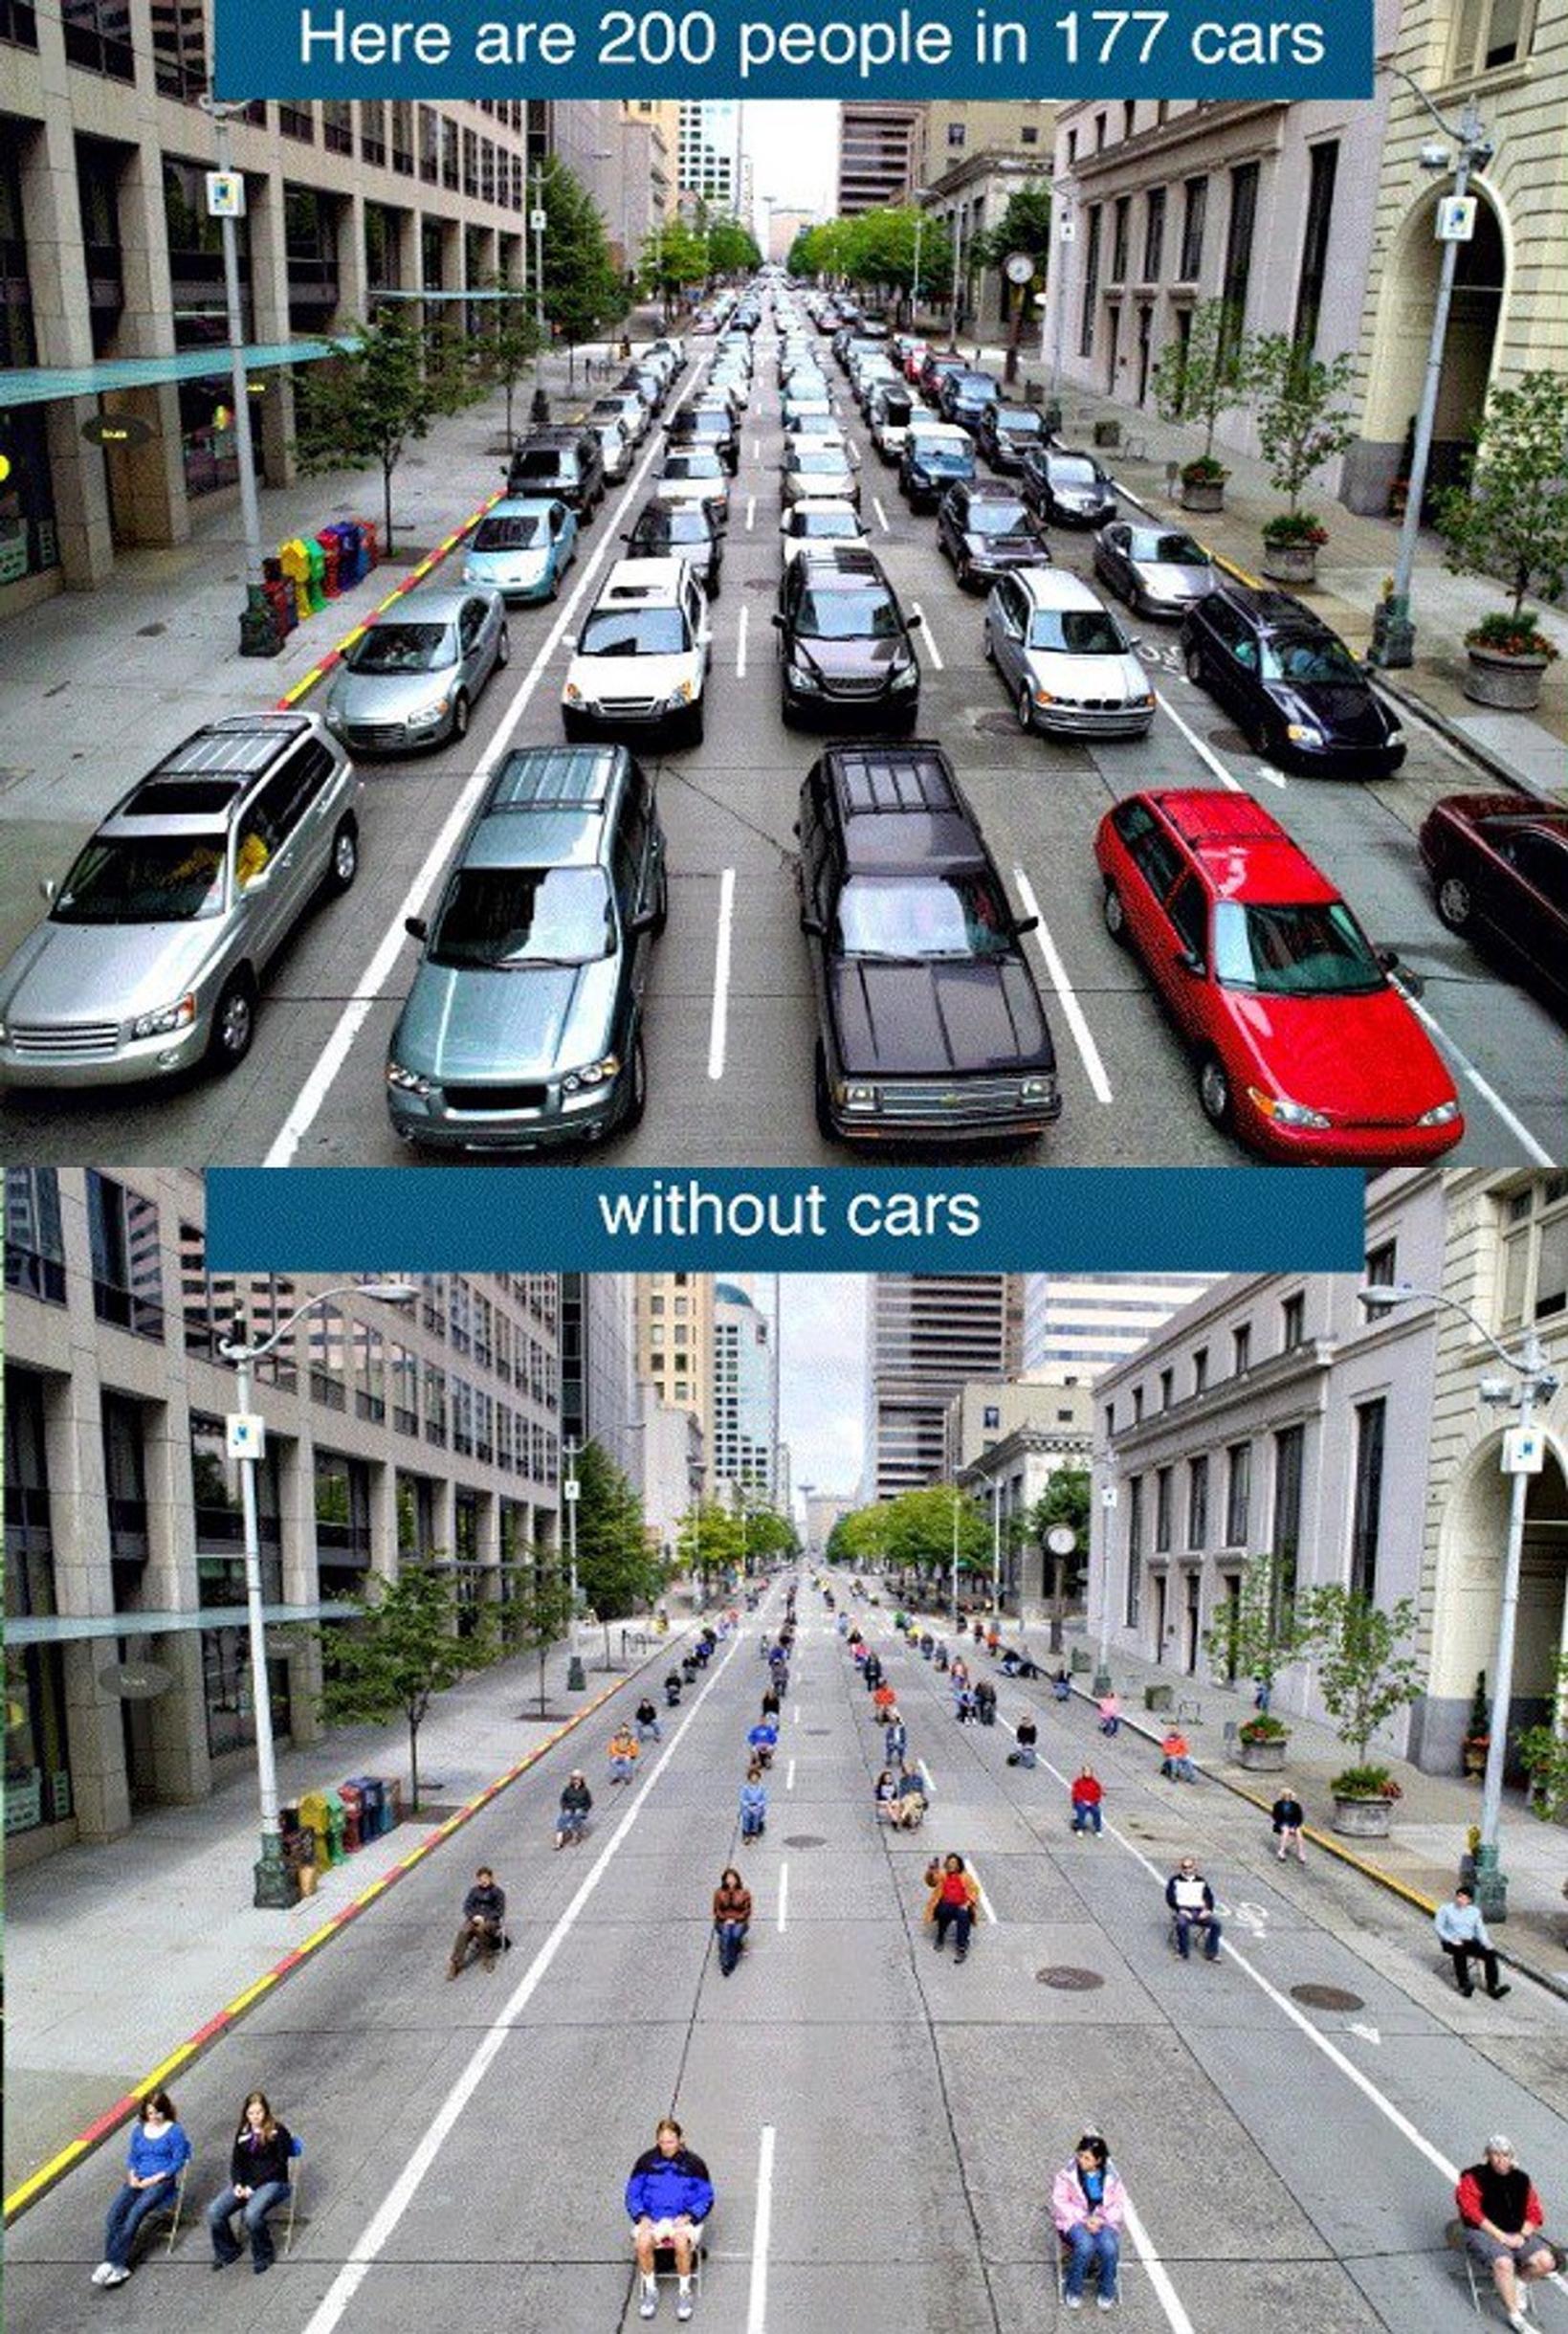 With cars, the numbers just don’t add up. So it’s more walking and cycling for the urban transport win